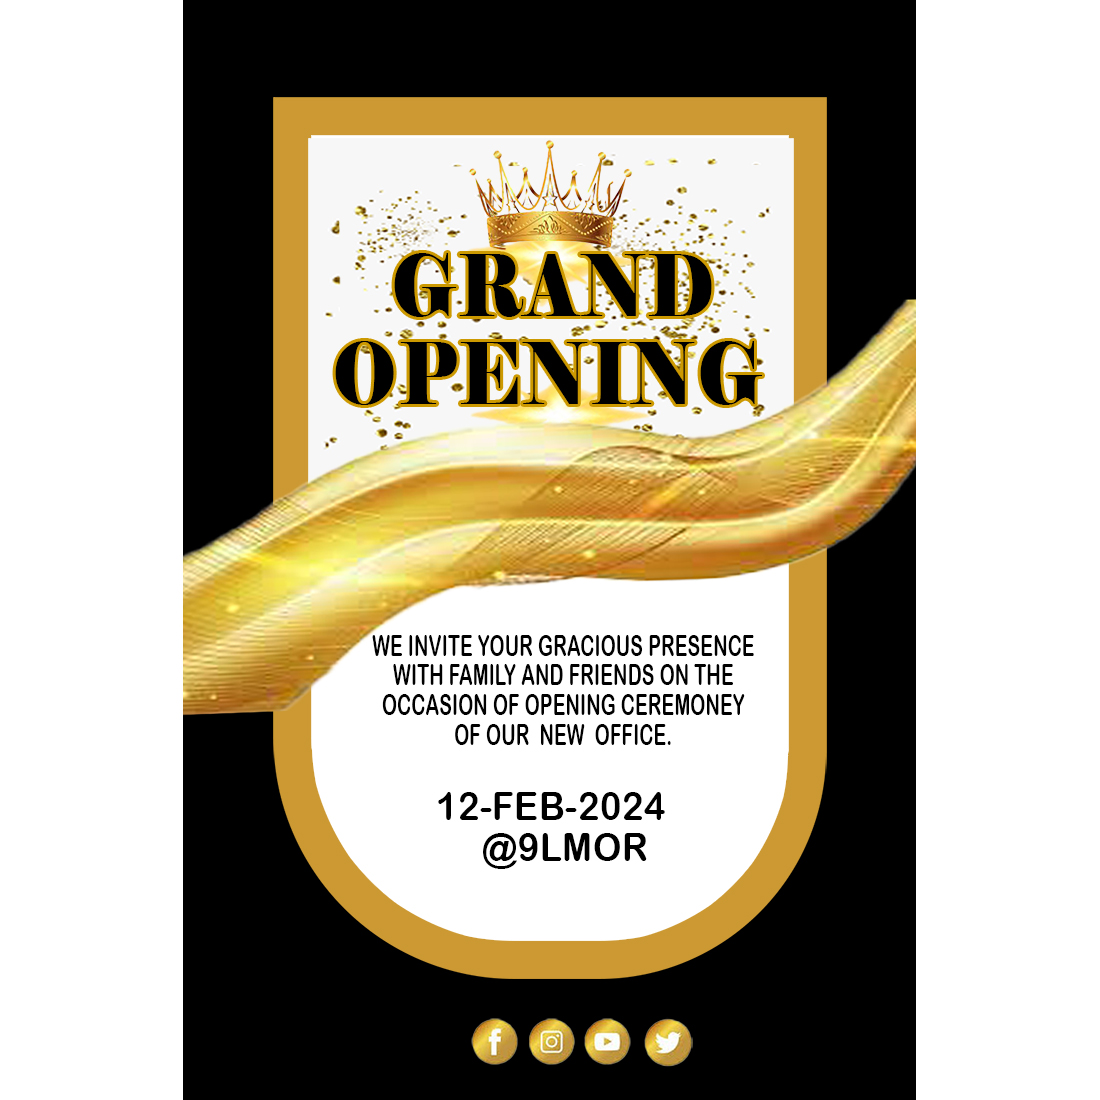 grand opening poster design 954